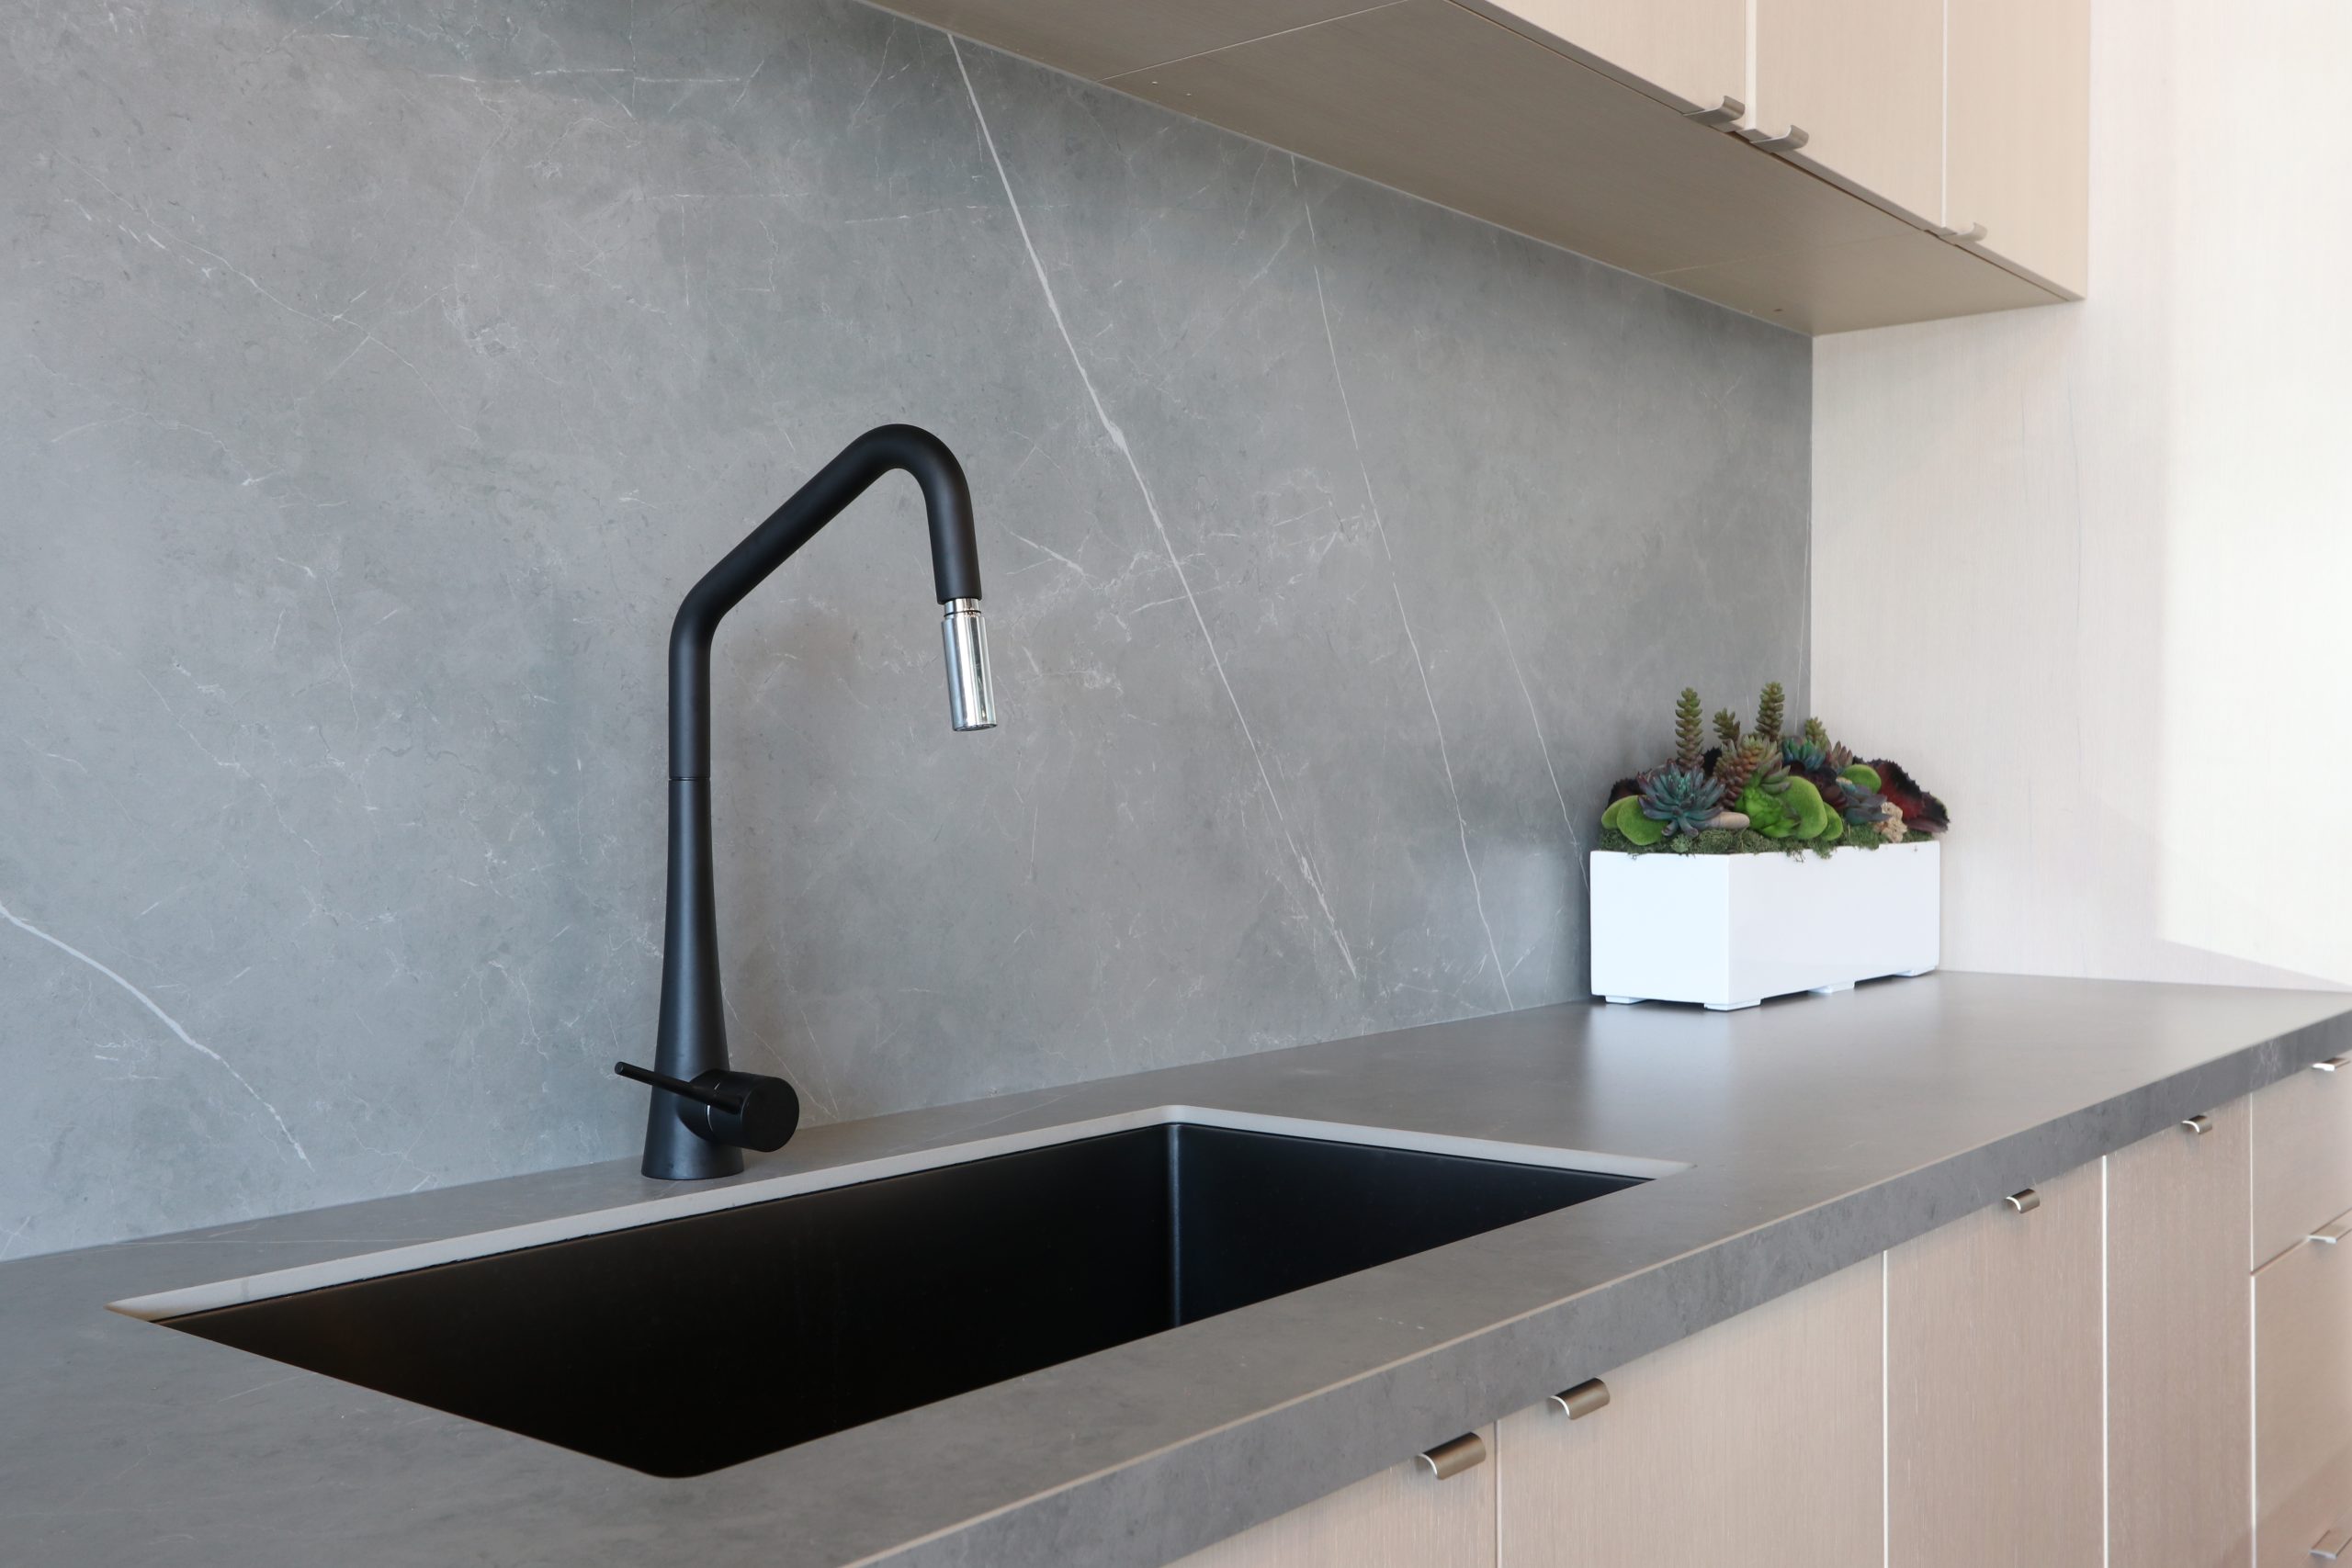 Can You Replace a Kitchen Sink Without Removing Countertop?